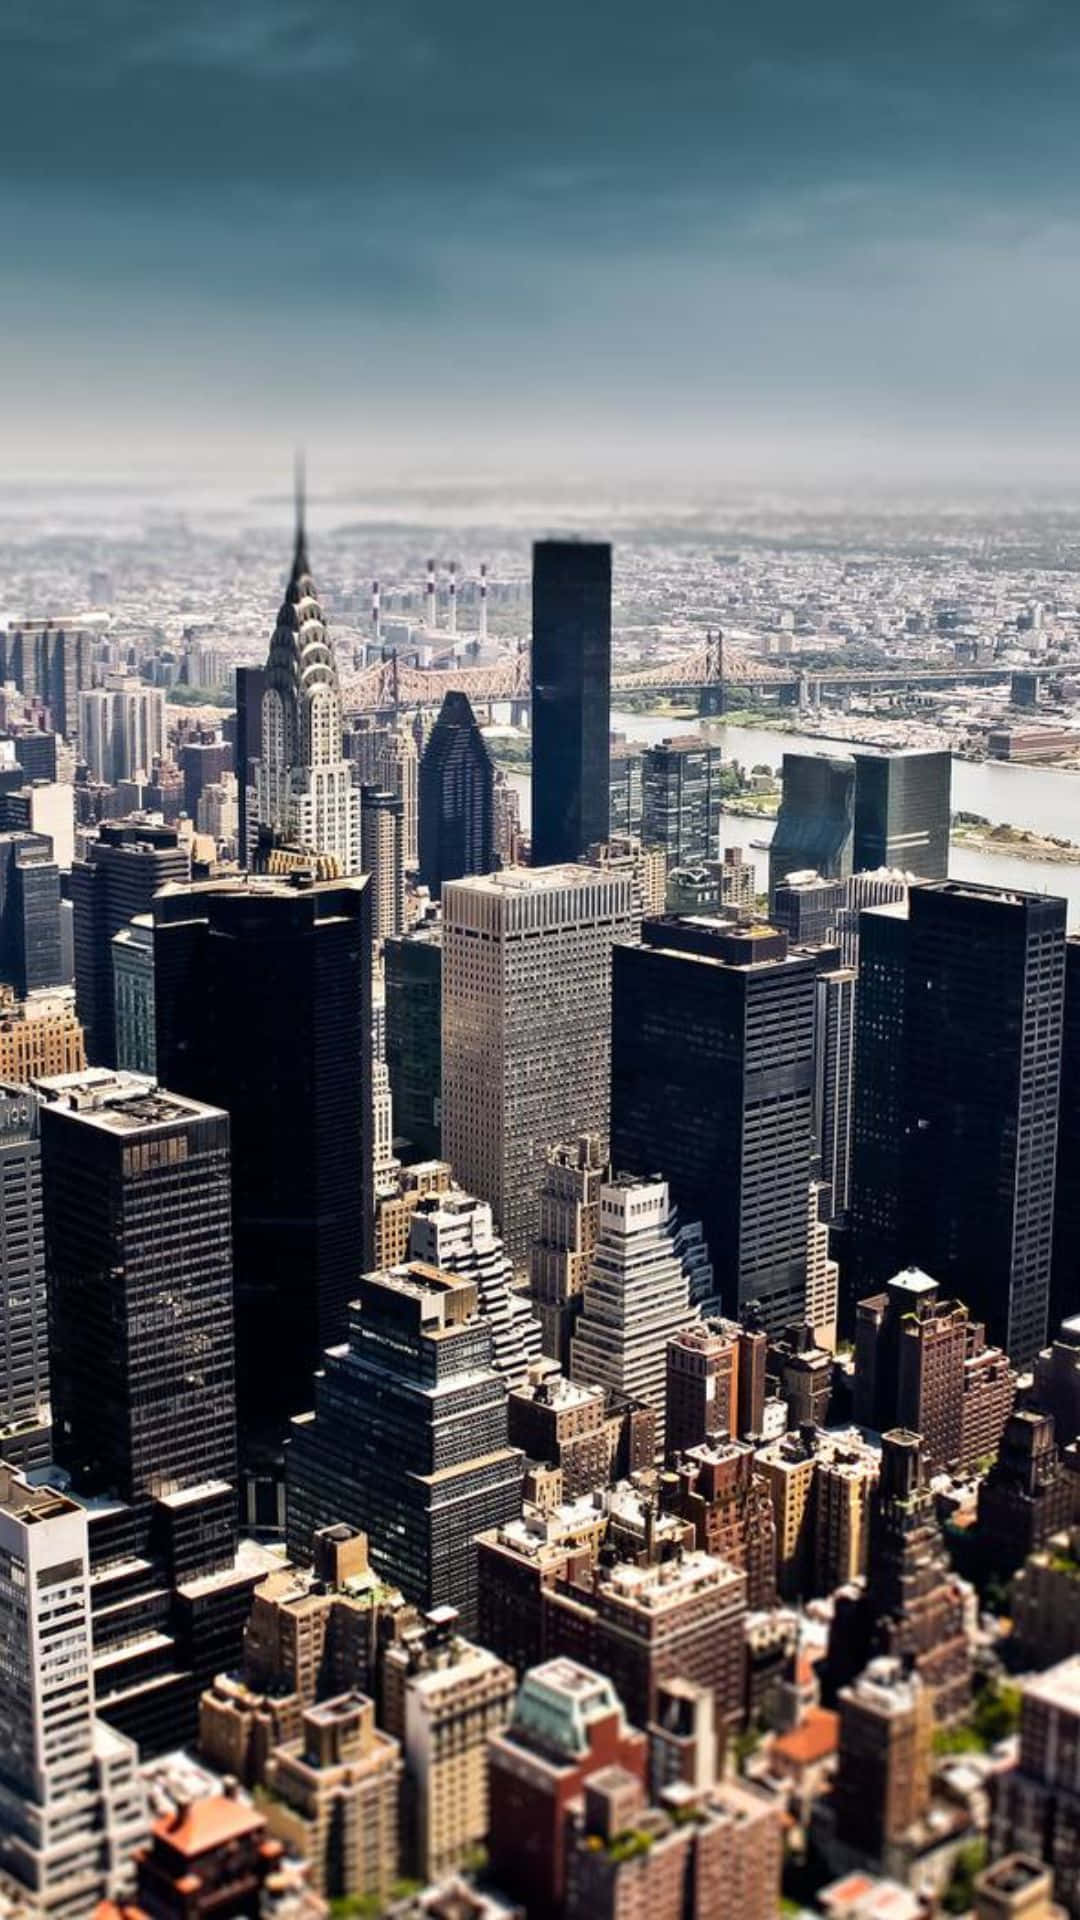 "Explore the vibrant city of New York with Android"